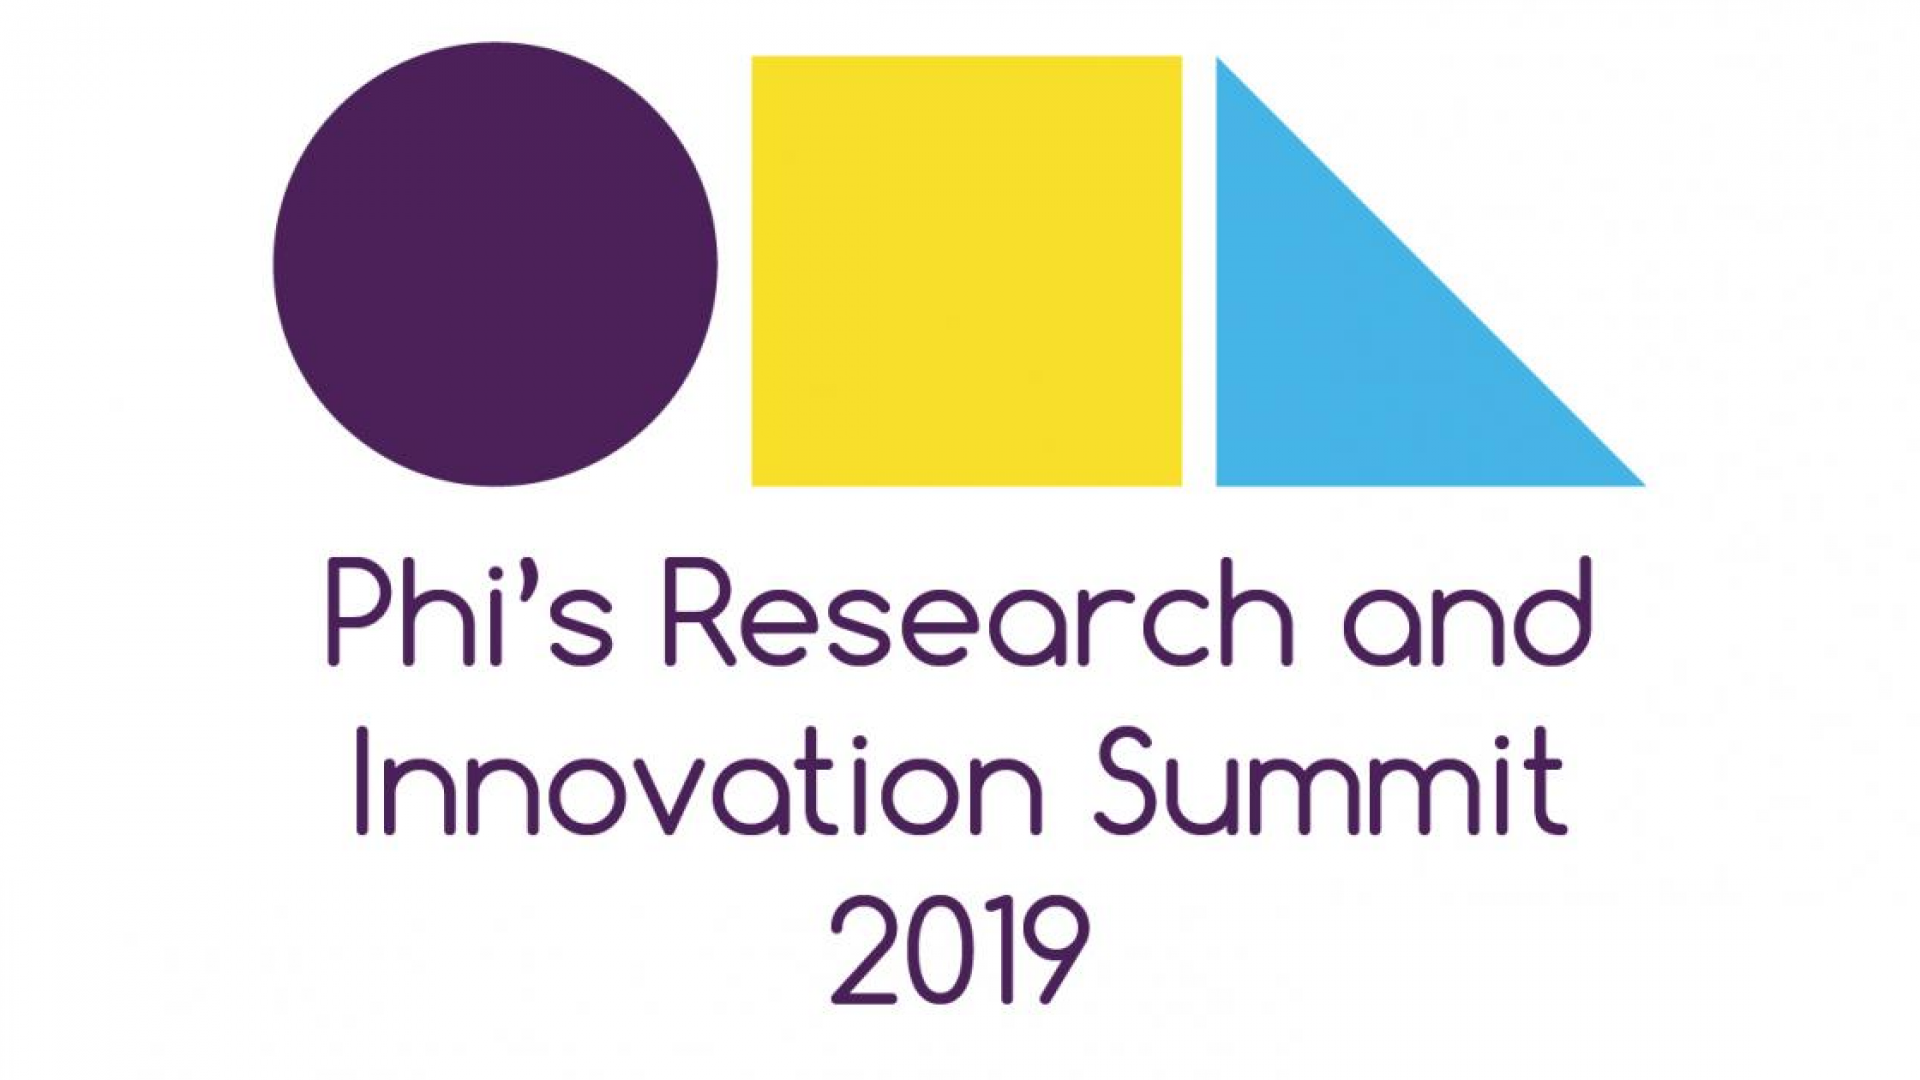 Phis Research and Innovation Summit logo